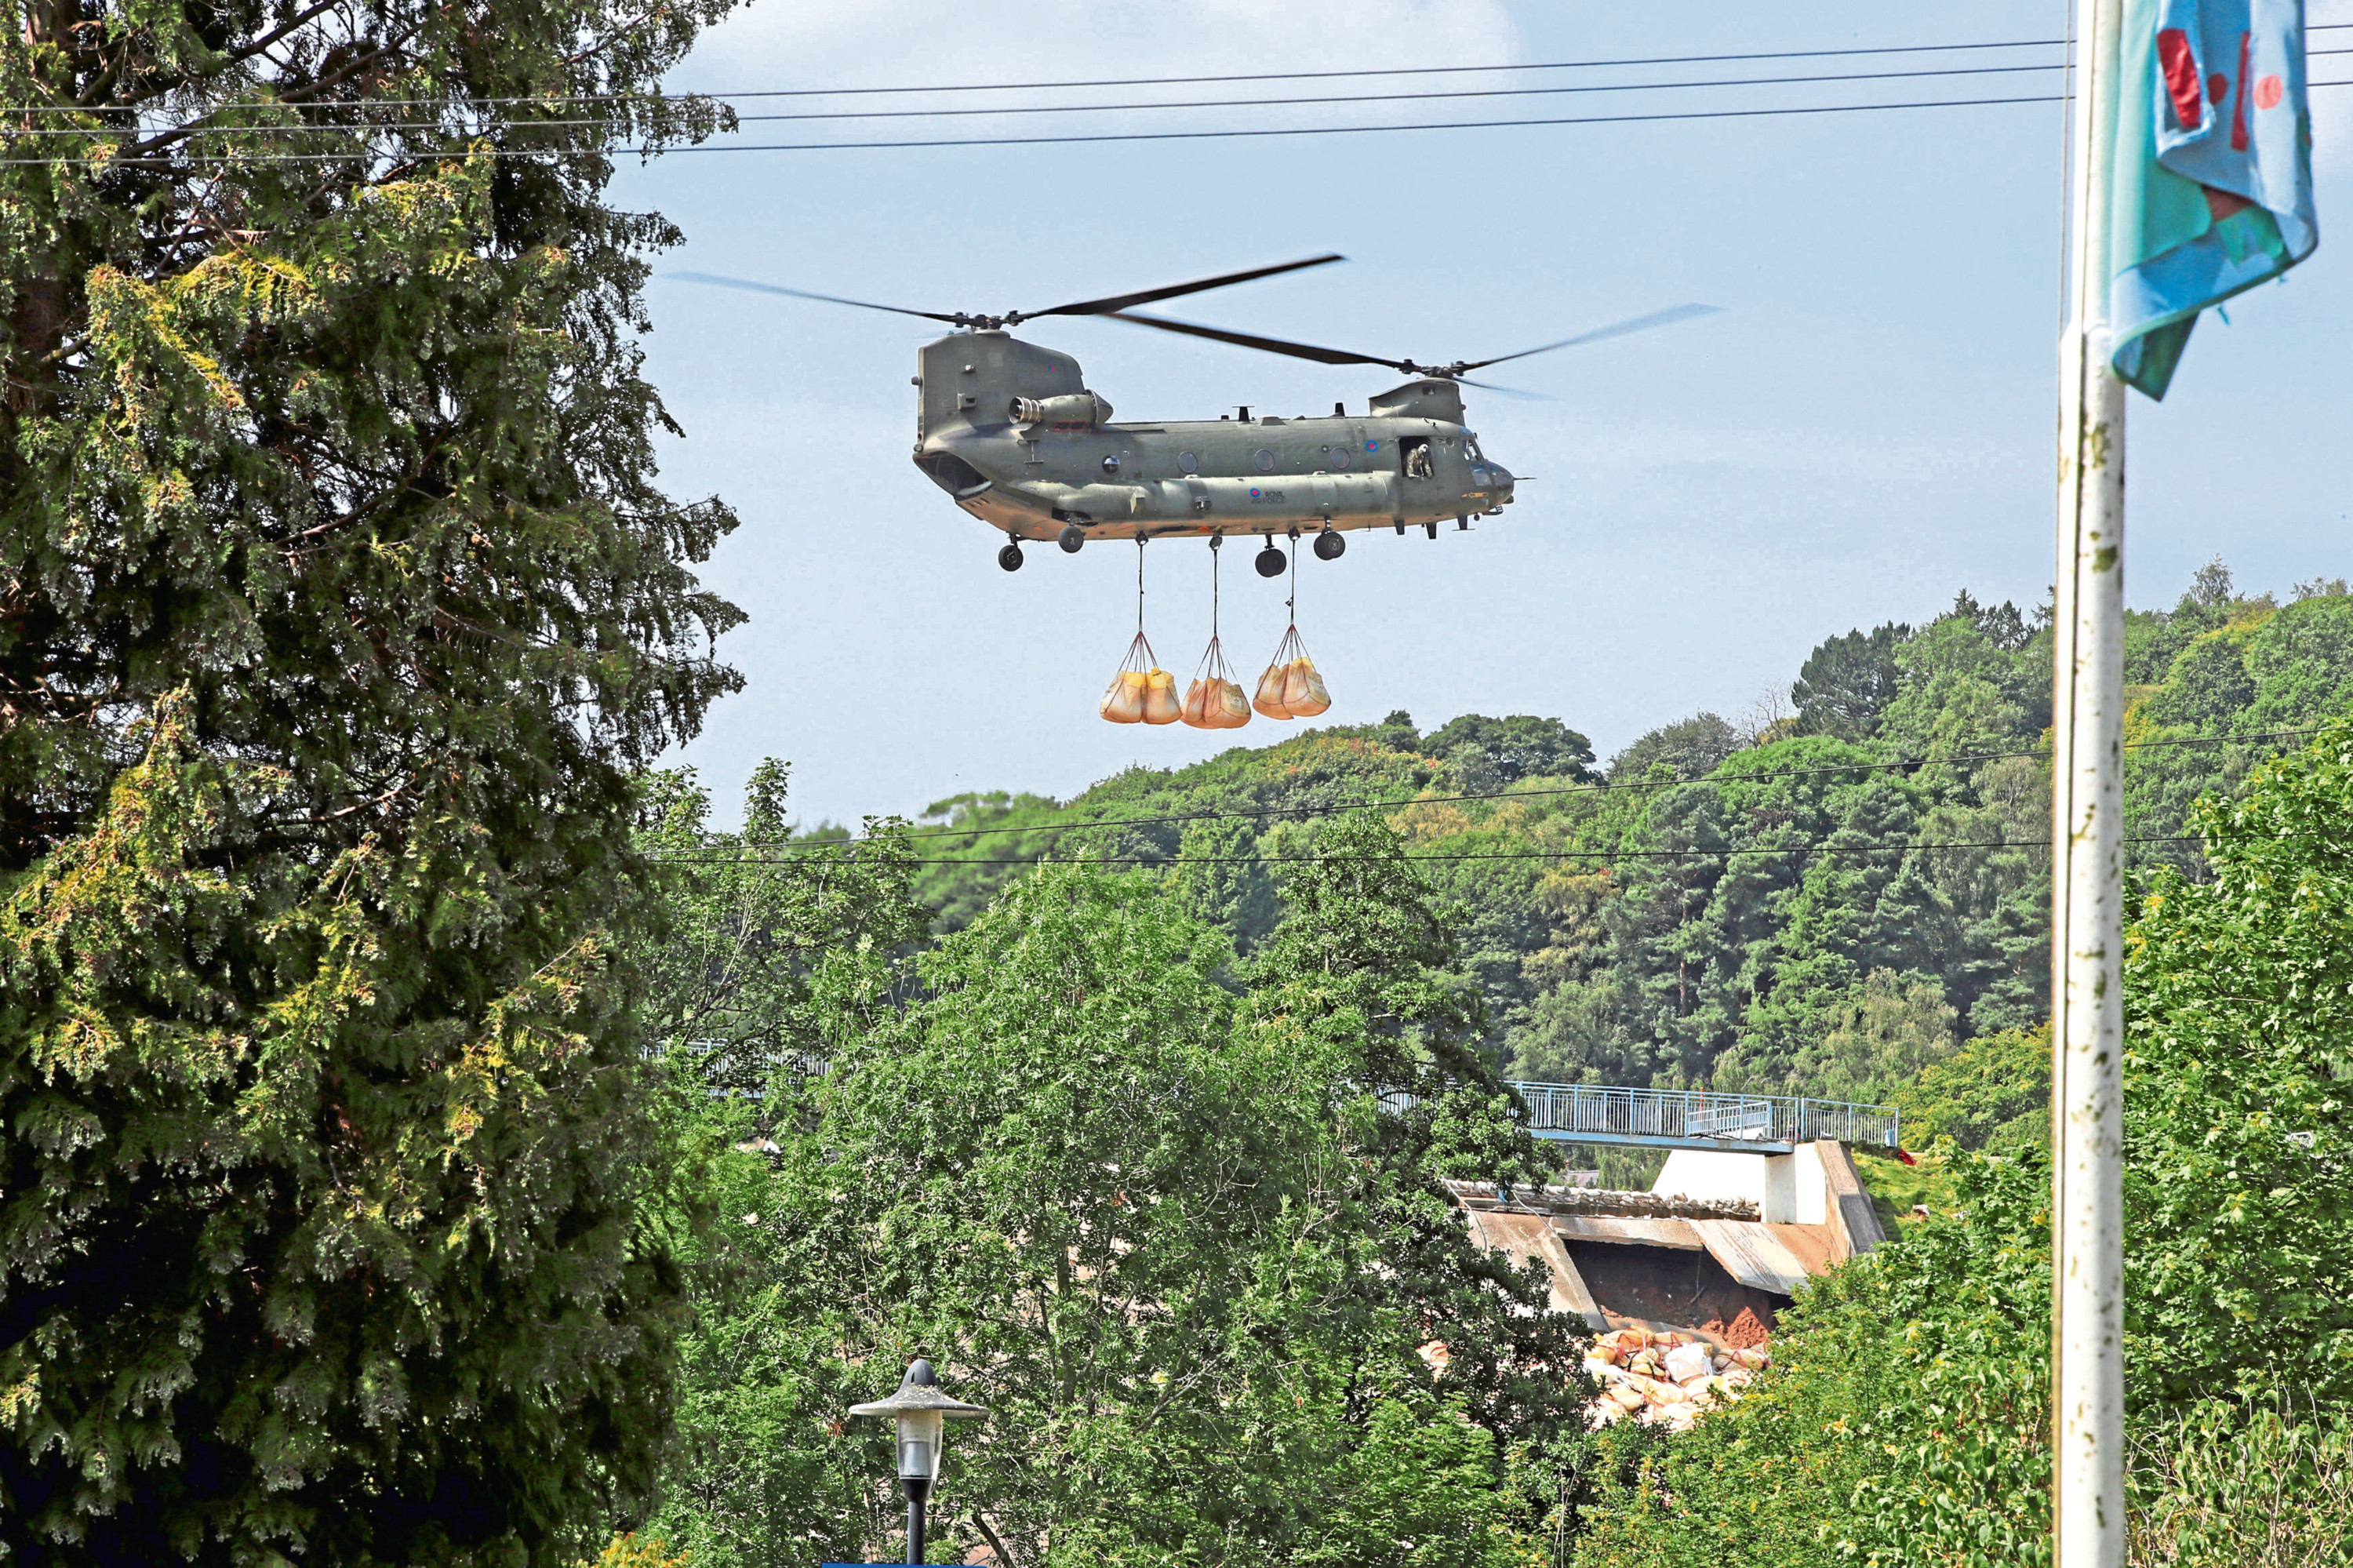 An RAF Chinook helicopter flies in sandbags to help repair the dam at Toddbrook reservoir near the village of Whaley Bridge in Derbyshire